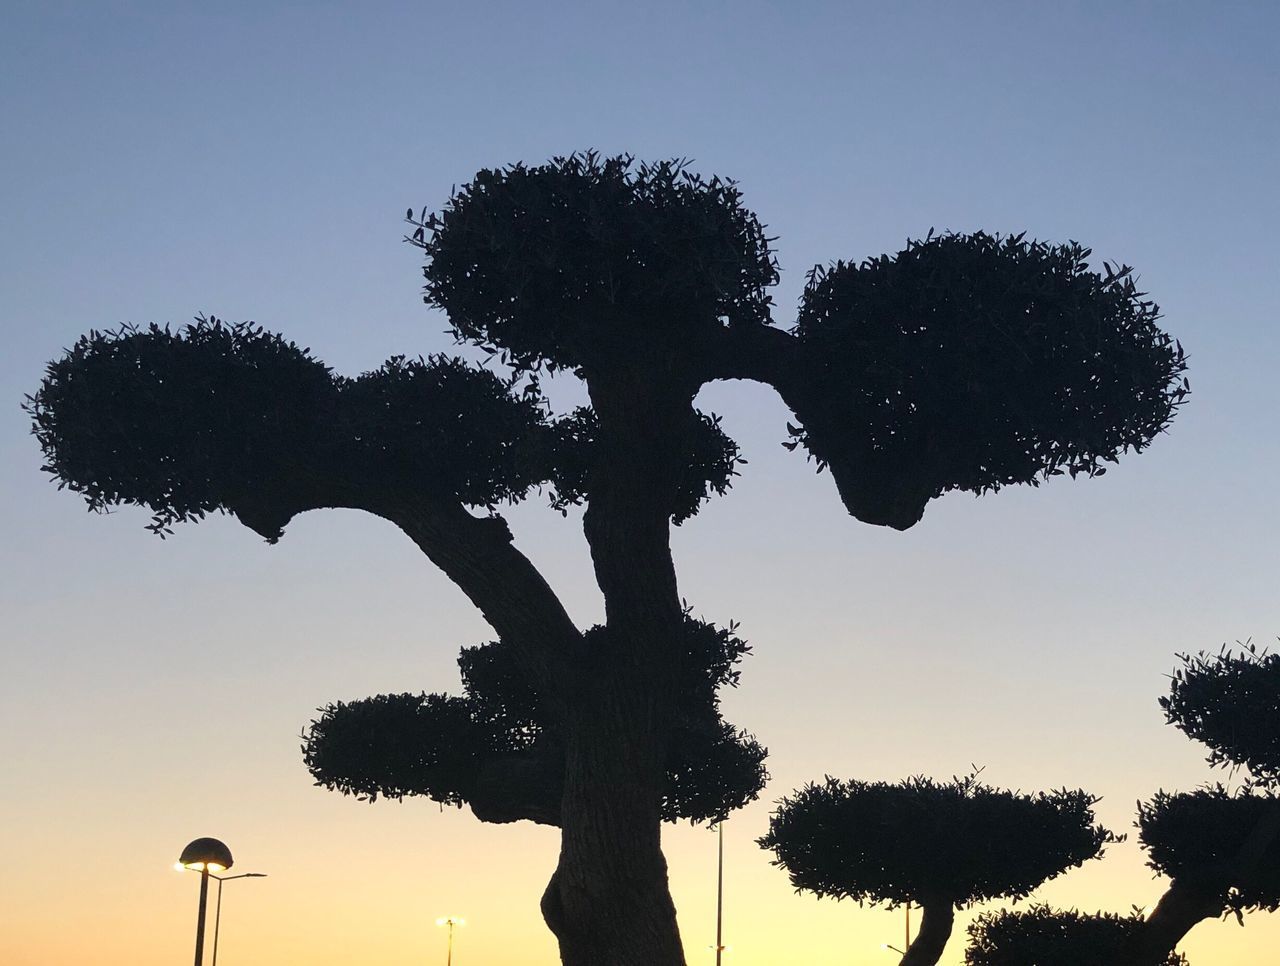 LOW ANGLE VIEW OF SILHOUETTE TREE AGAINST SKY DURING SUNSET